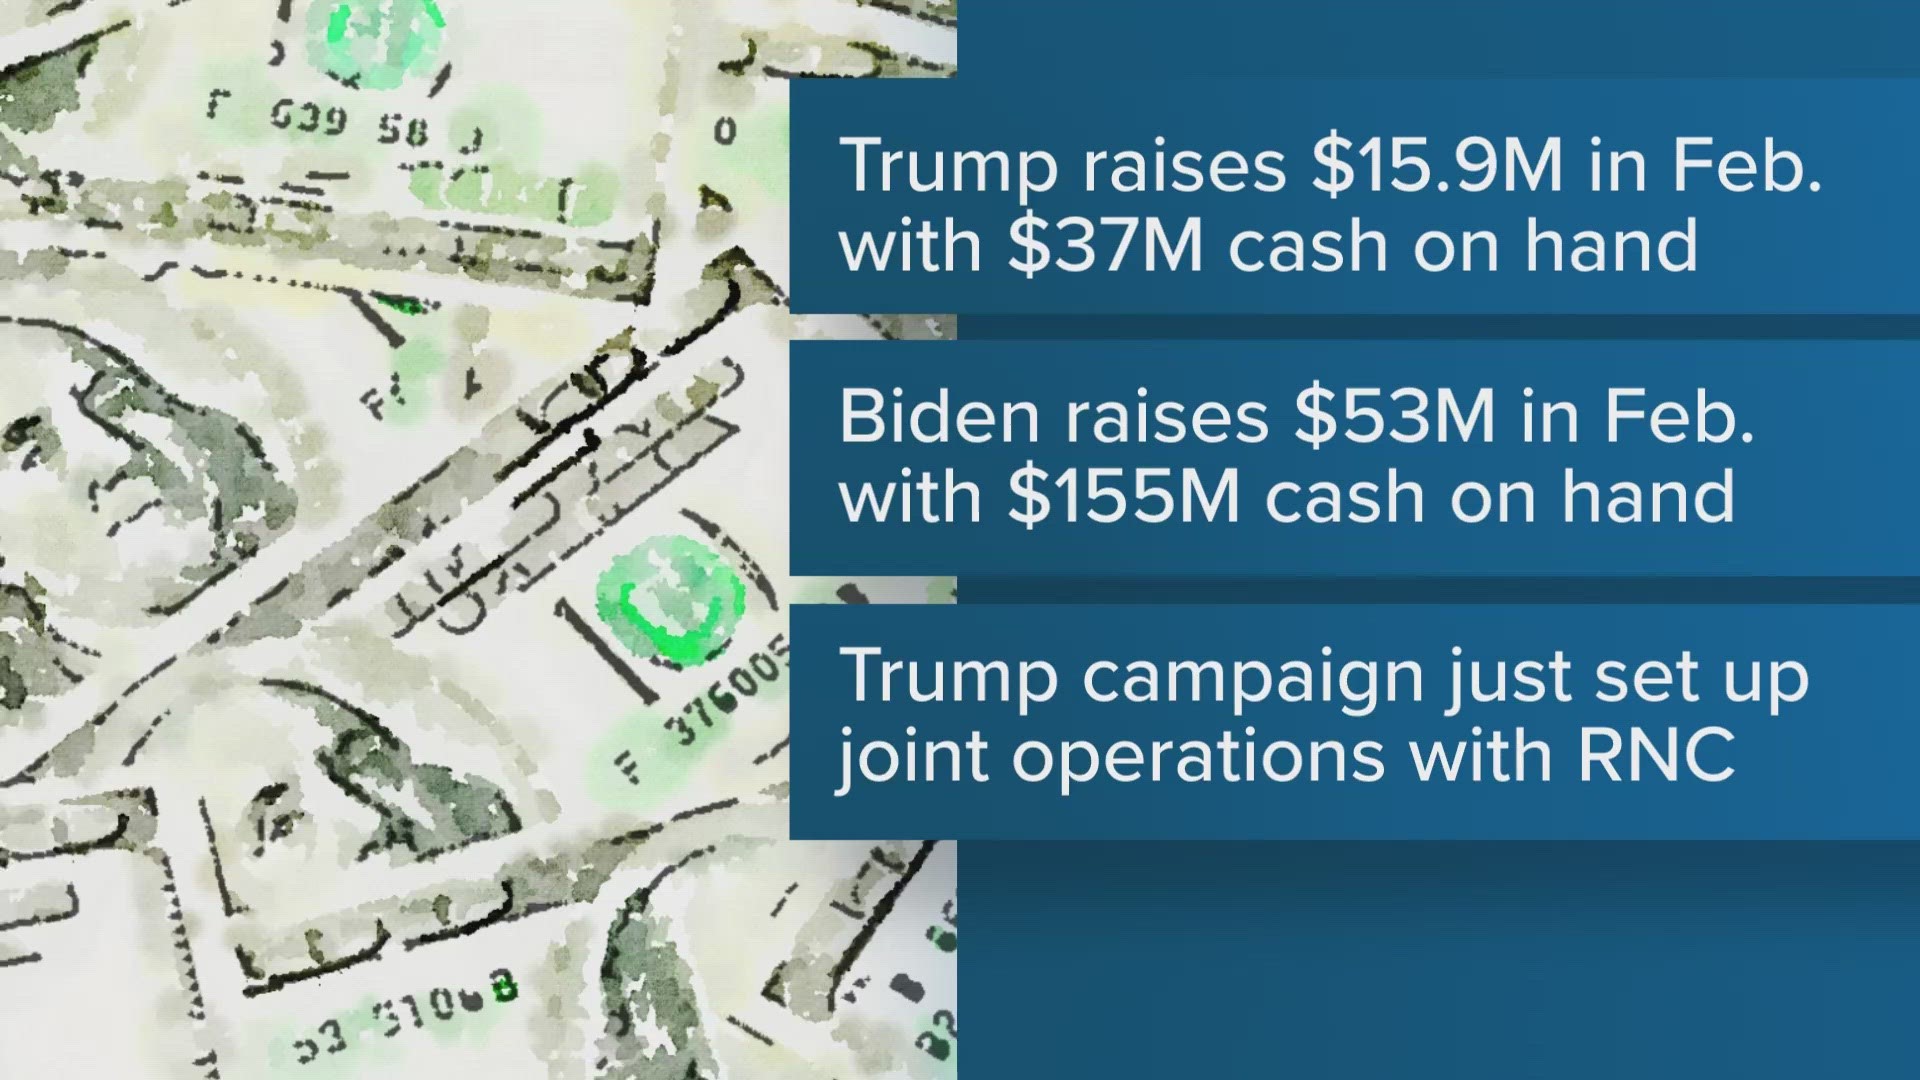 The latest campaign finance reports are out from the frontrunners in the race for president, and the incumbent continues to outpace former President Trump.